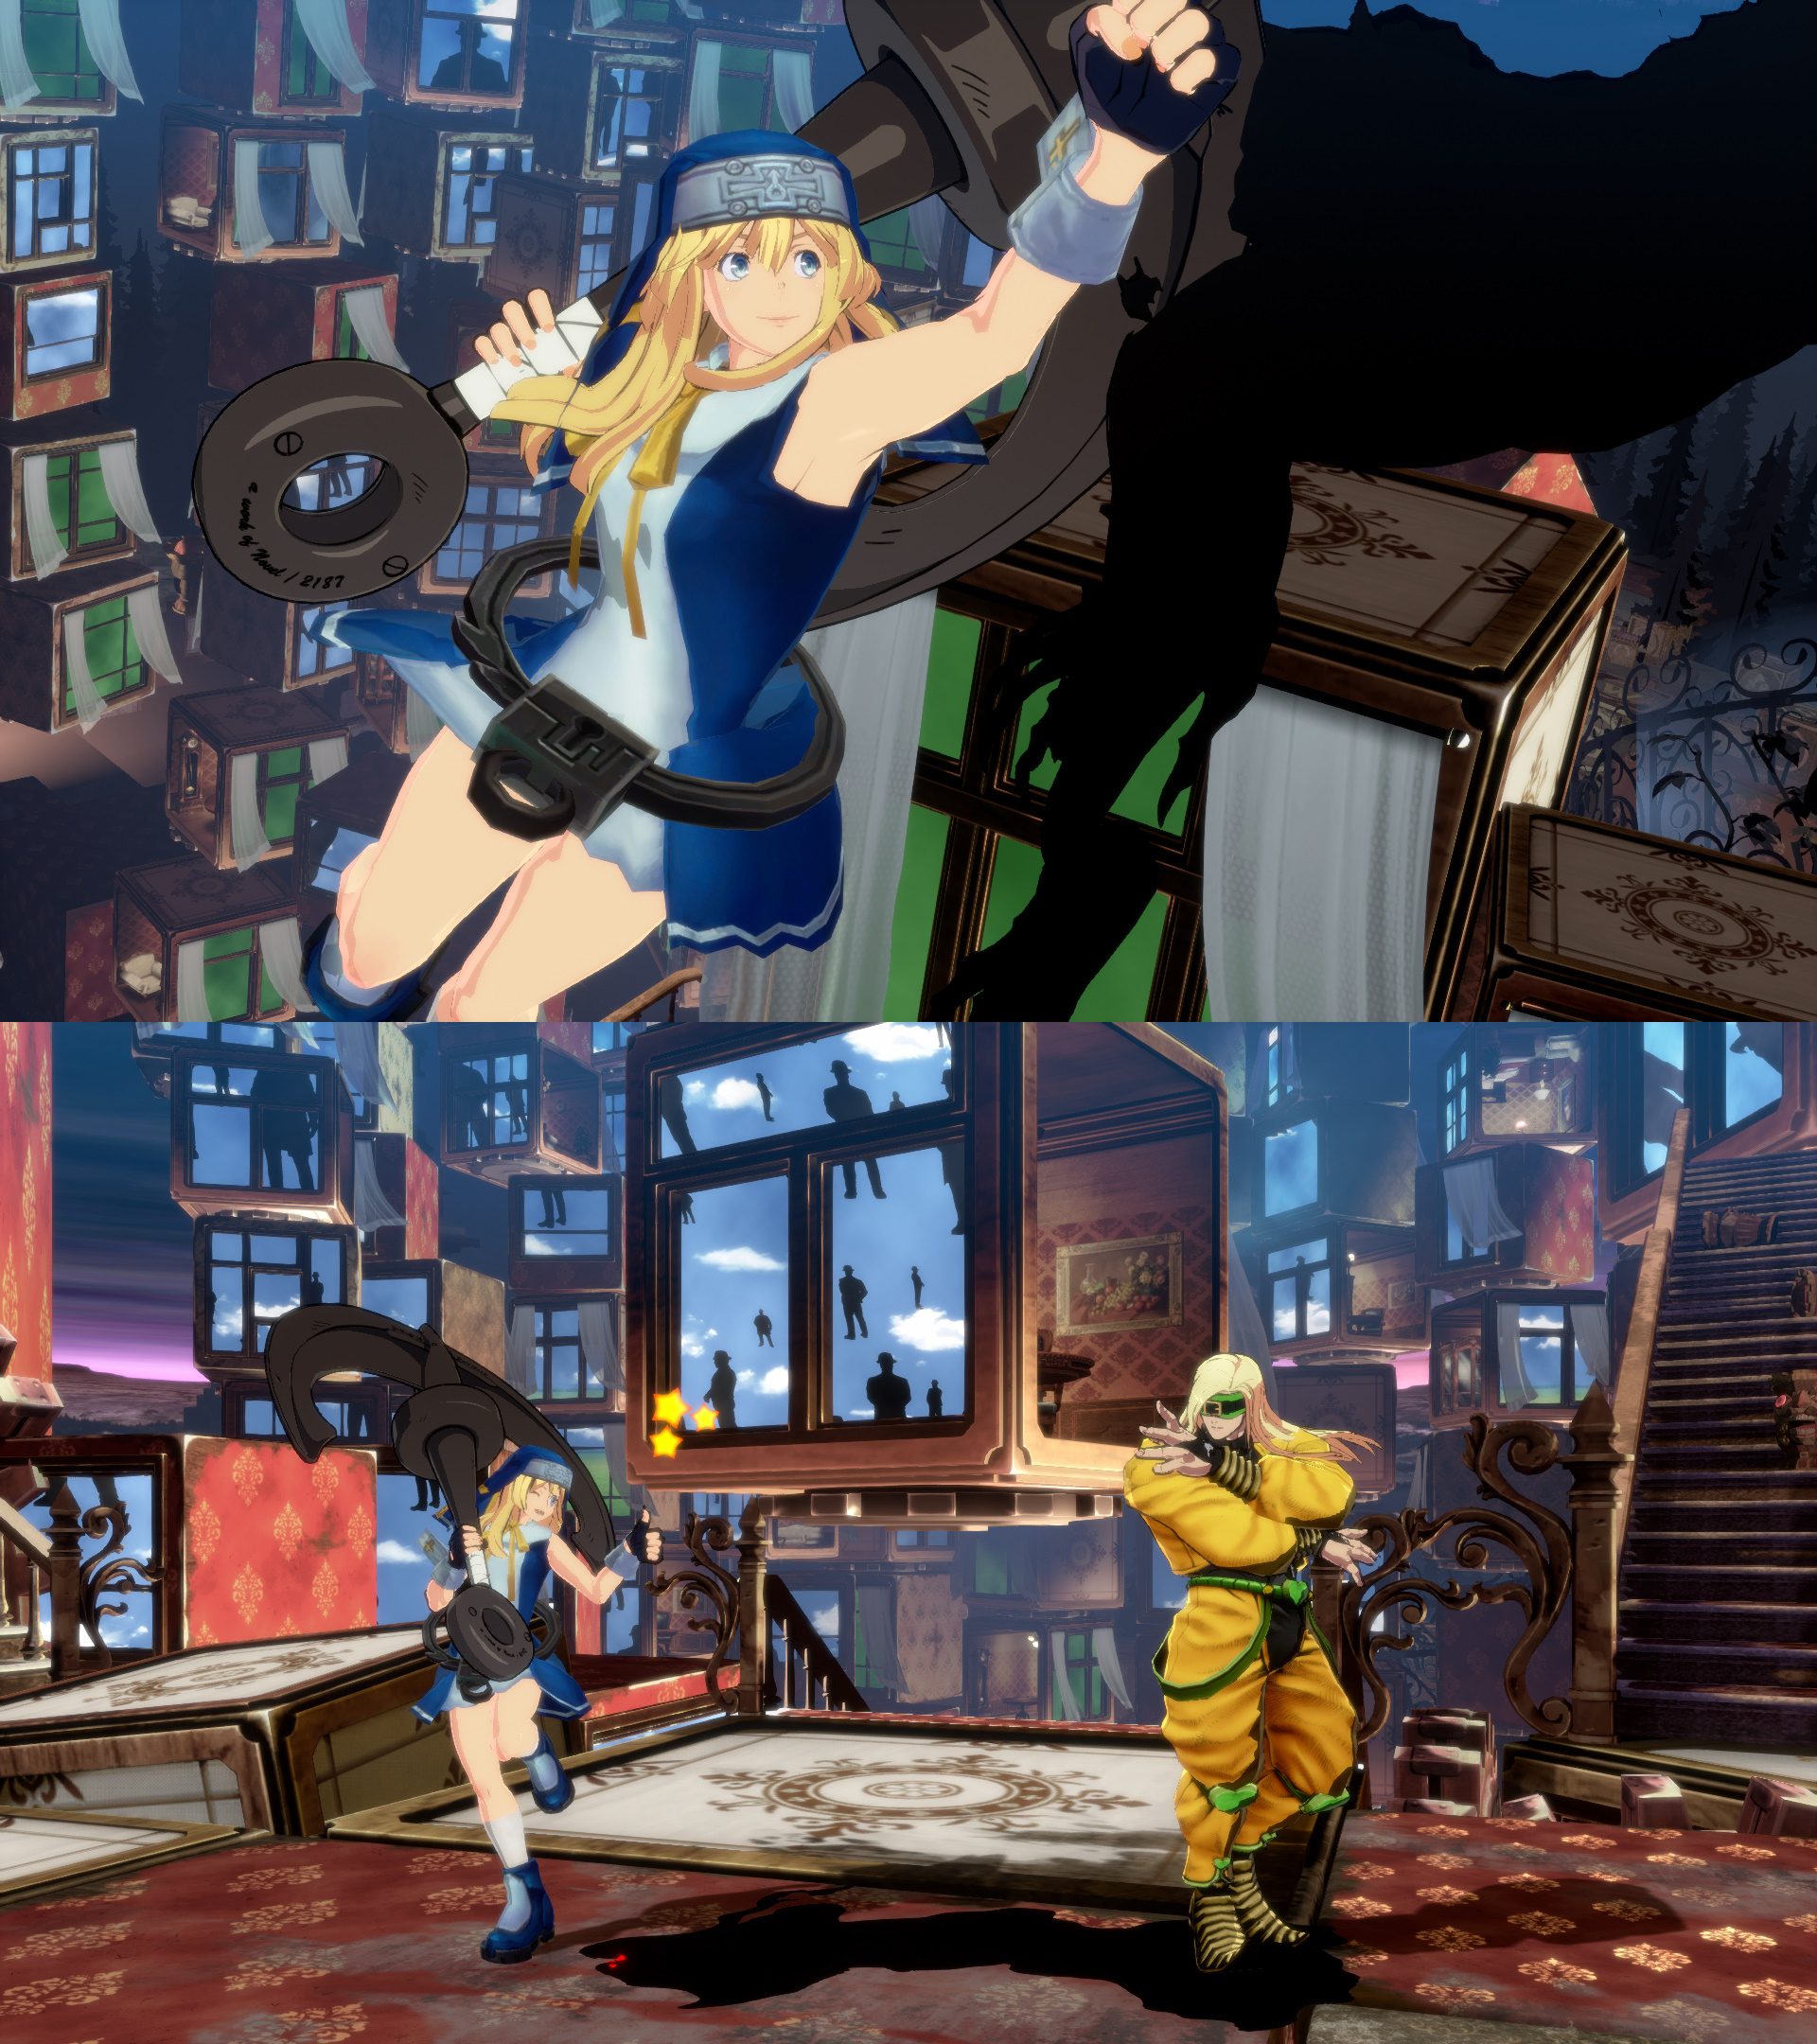 Guilty Gear Strive mod Bridget outfit for May by monkeygigabuster